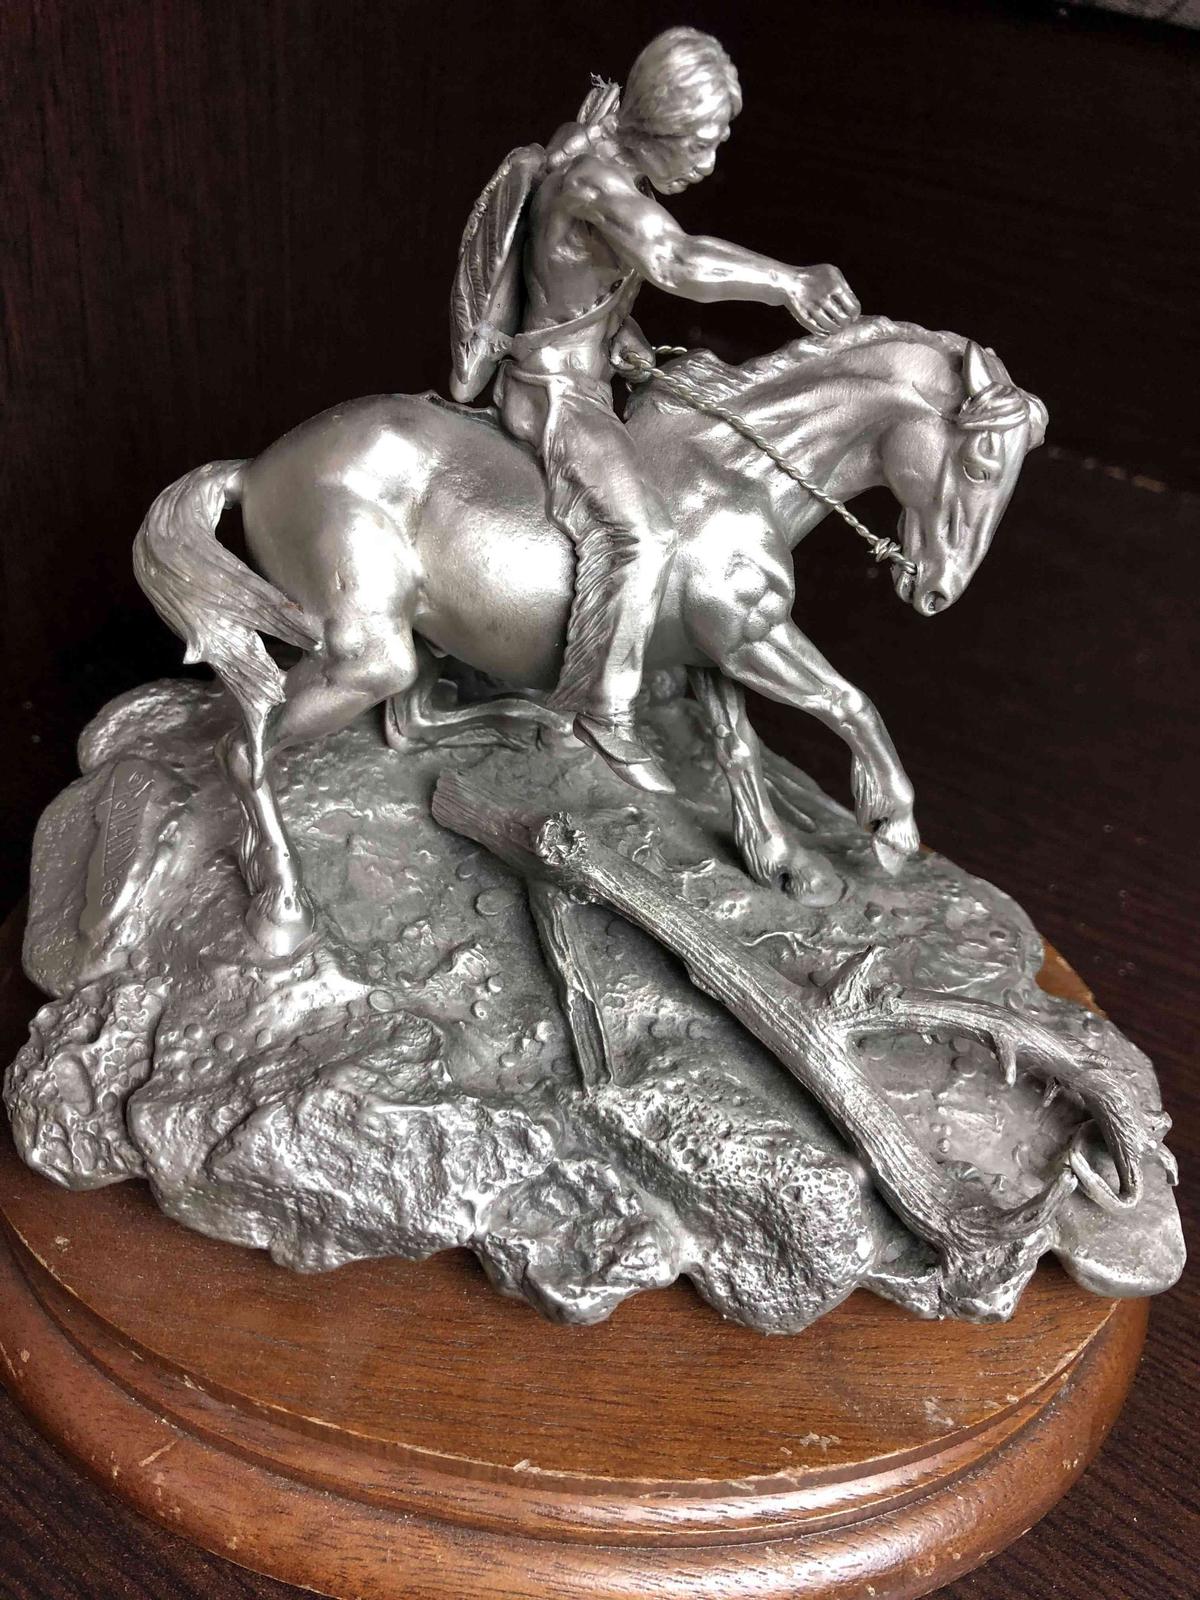 Pewter, great collectable sculpture 'ENEMY TRACKS' Indian riding the Horse, signed and numbered coll